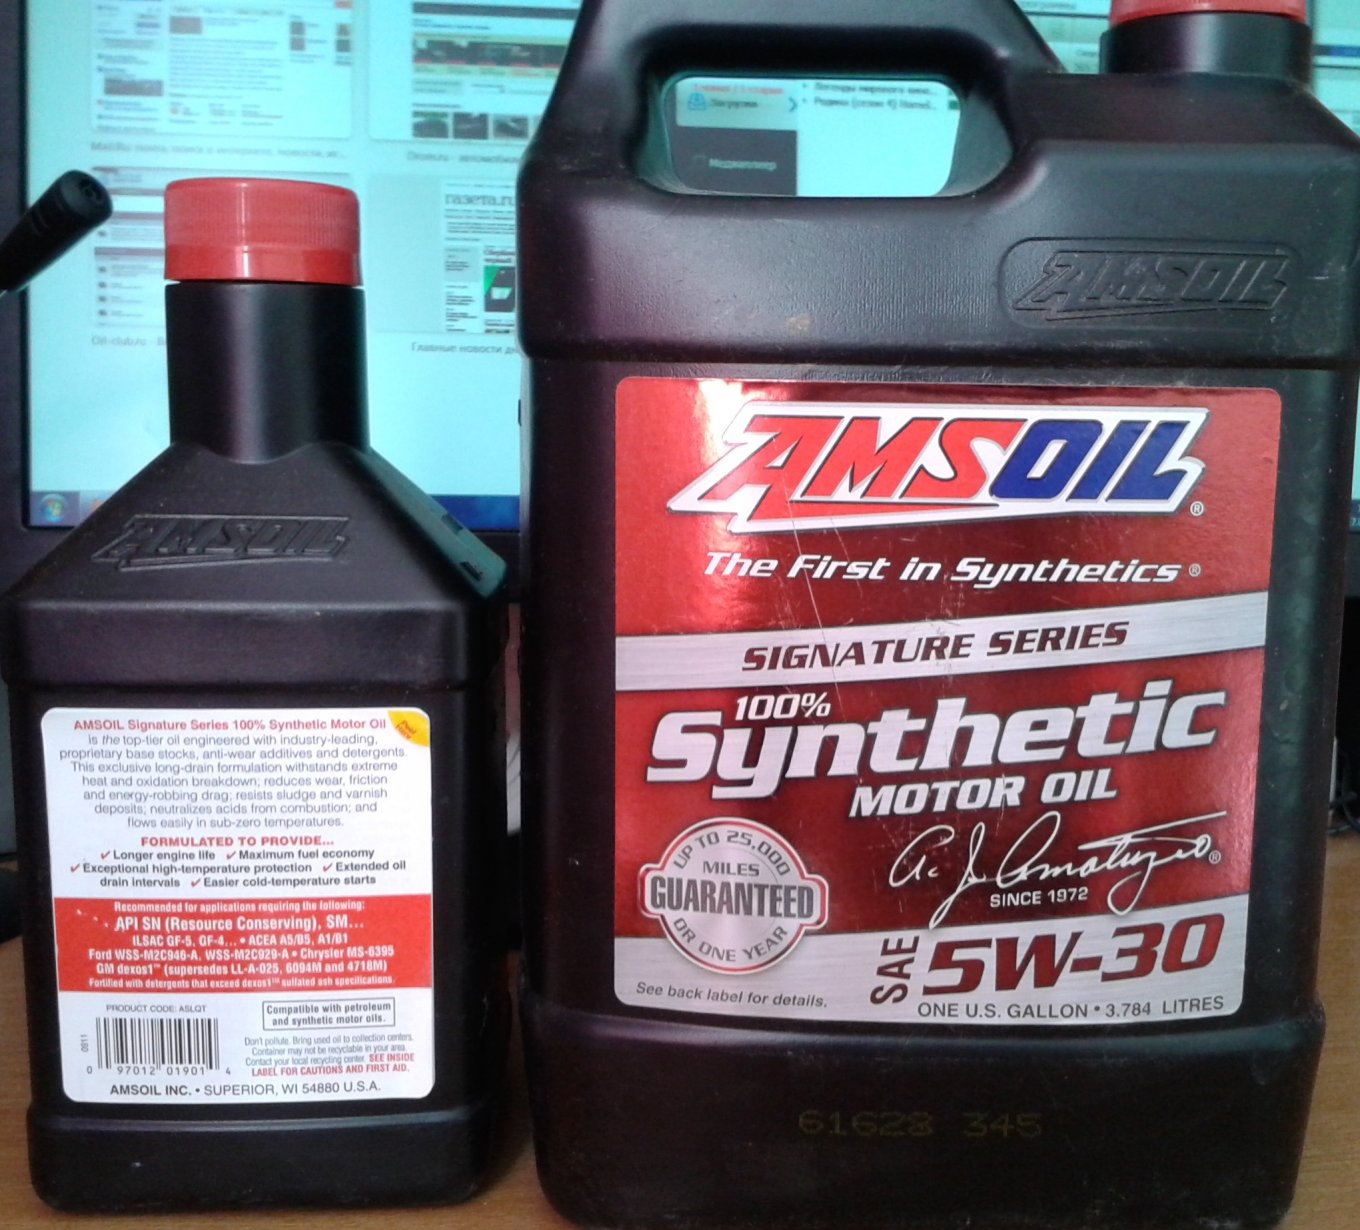 Signature series synthetic. Масло AMSOIL 5w30. AMSOIL Signature Series 5w-30. AMSOIL Signature Series Synthetic Motor Oil SAE 5w-30. Аmsoil Signature Series 100% Synthetic 5w-30.